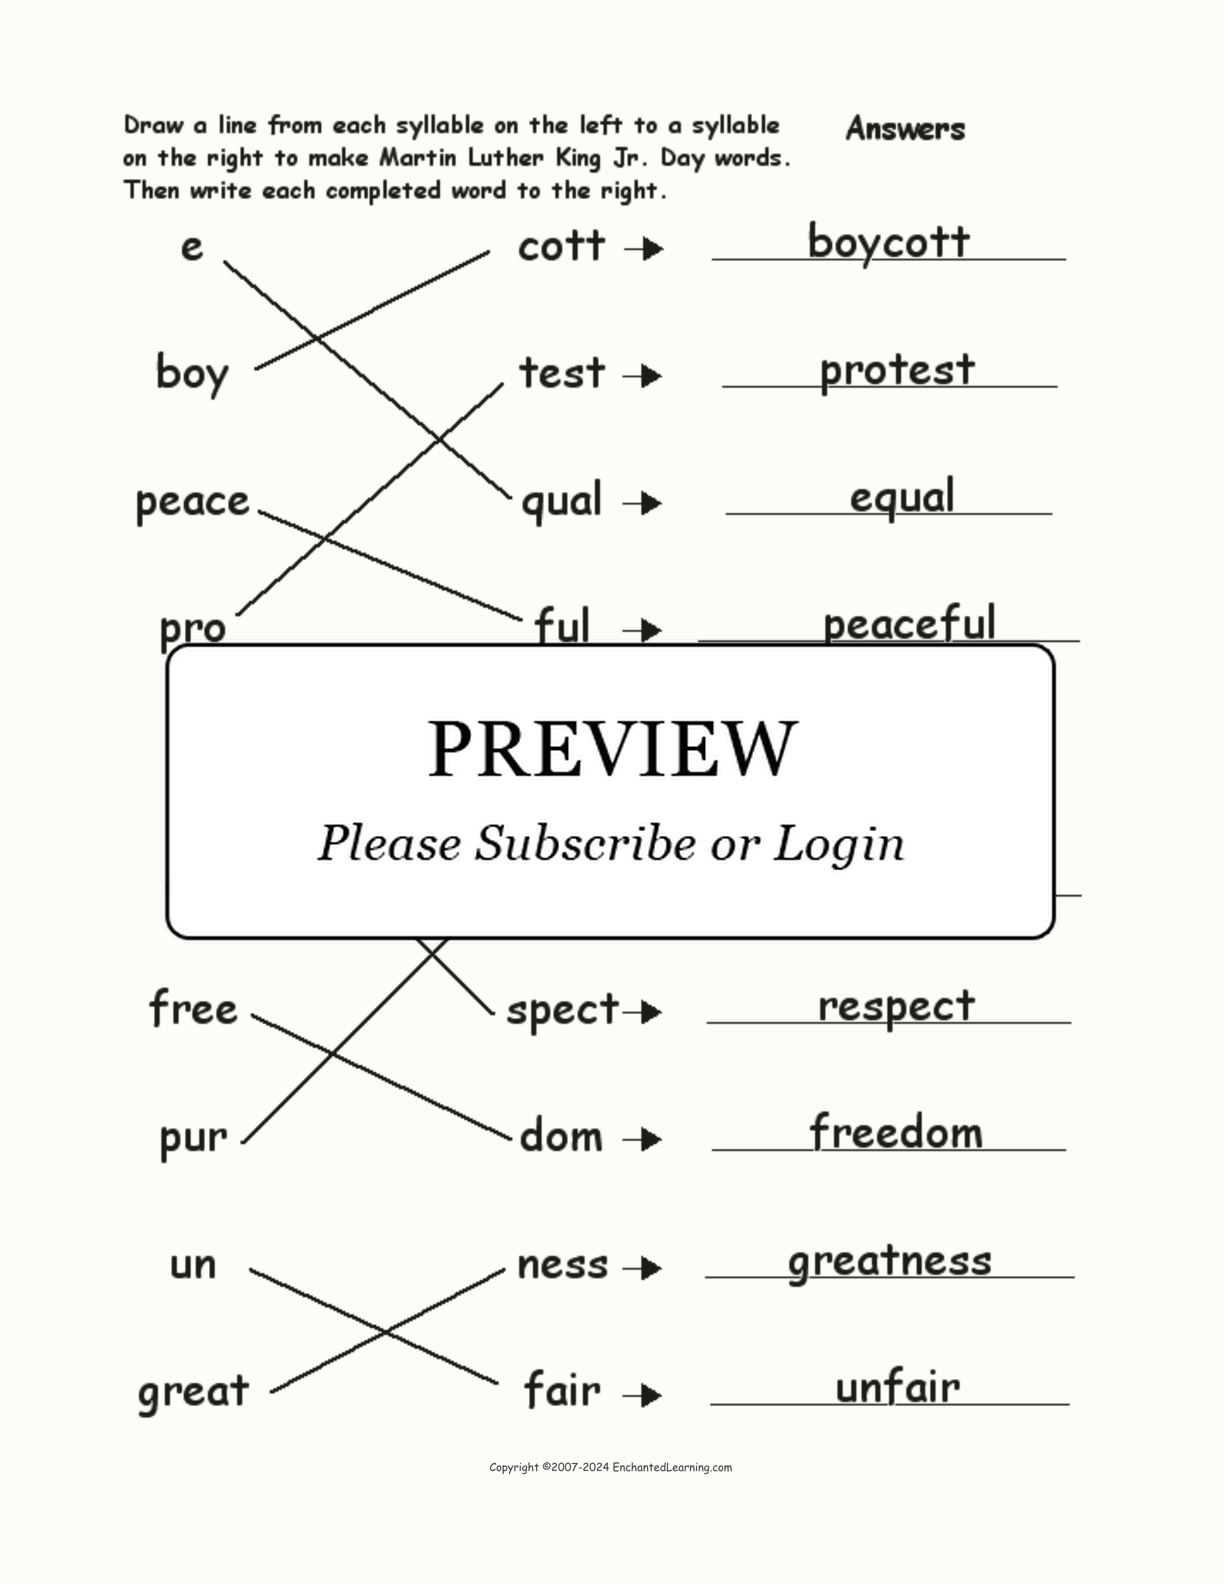 Match the Syllables: Martin Luther King, Jr. interactive worksheet page 2